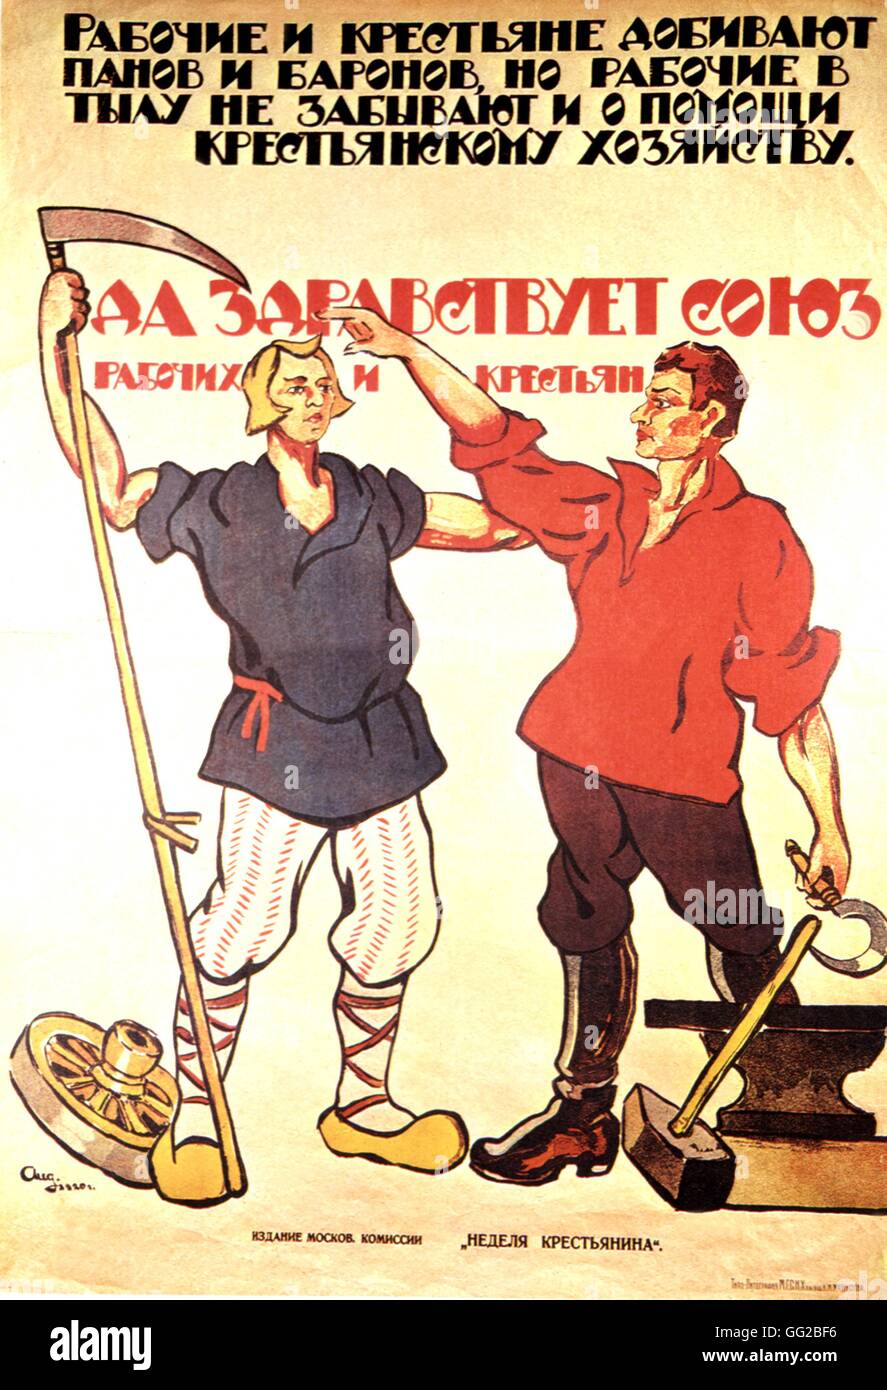 Propaganda poster by Alexander Apsit. 'Long live the workers and farmers' alliance' 90 x 64 cm 1920 U.S.S.R. Stock Photo